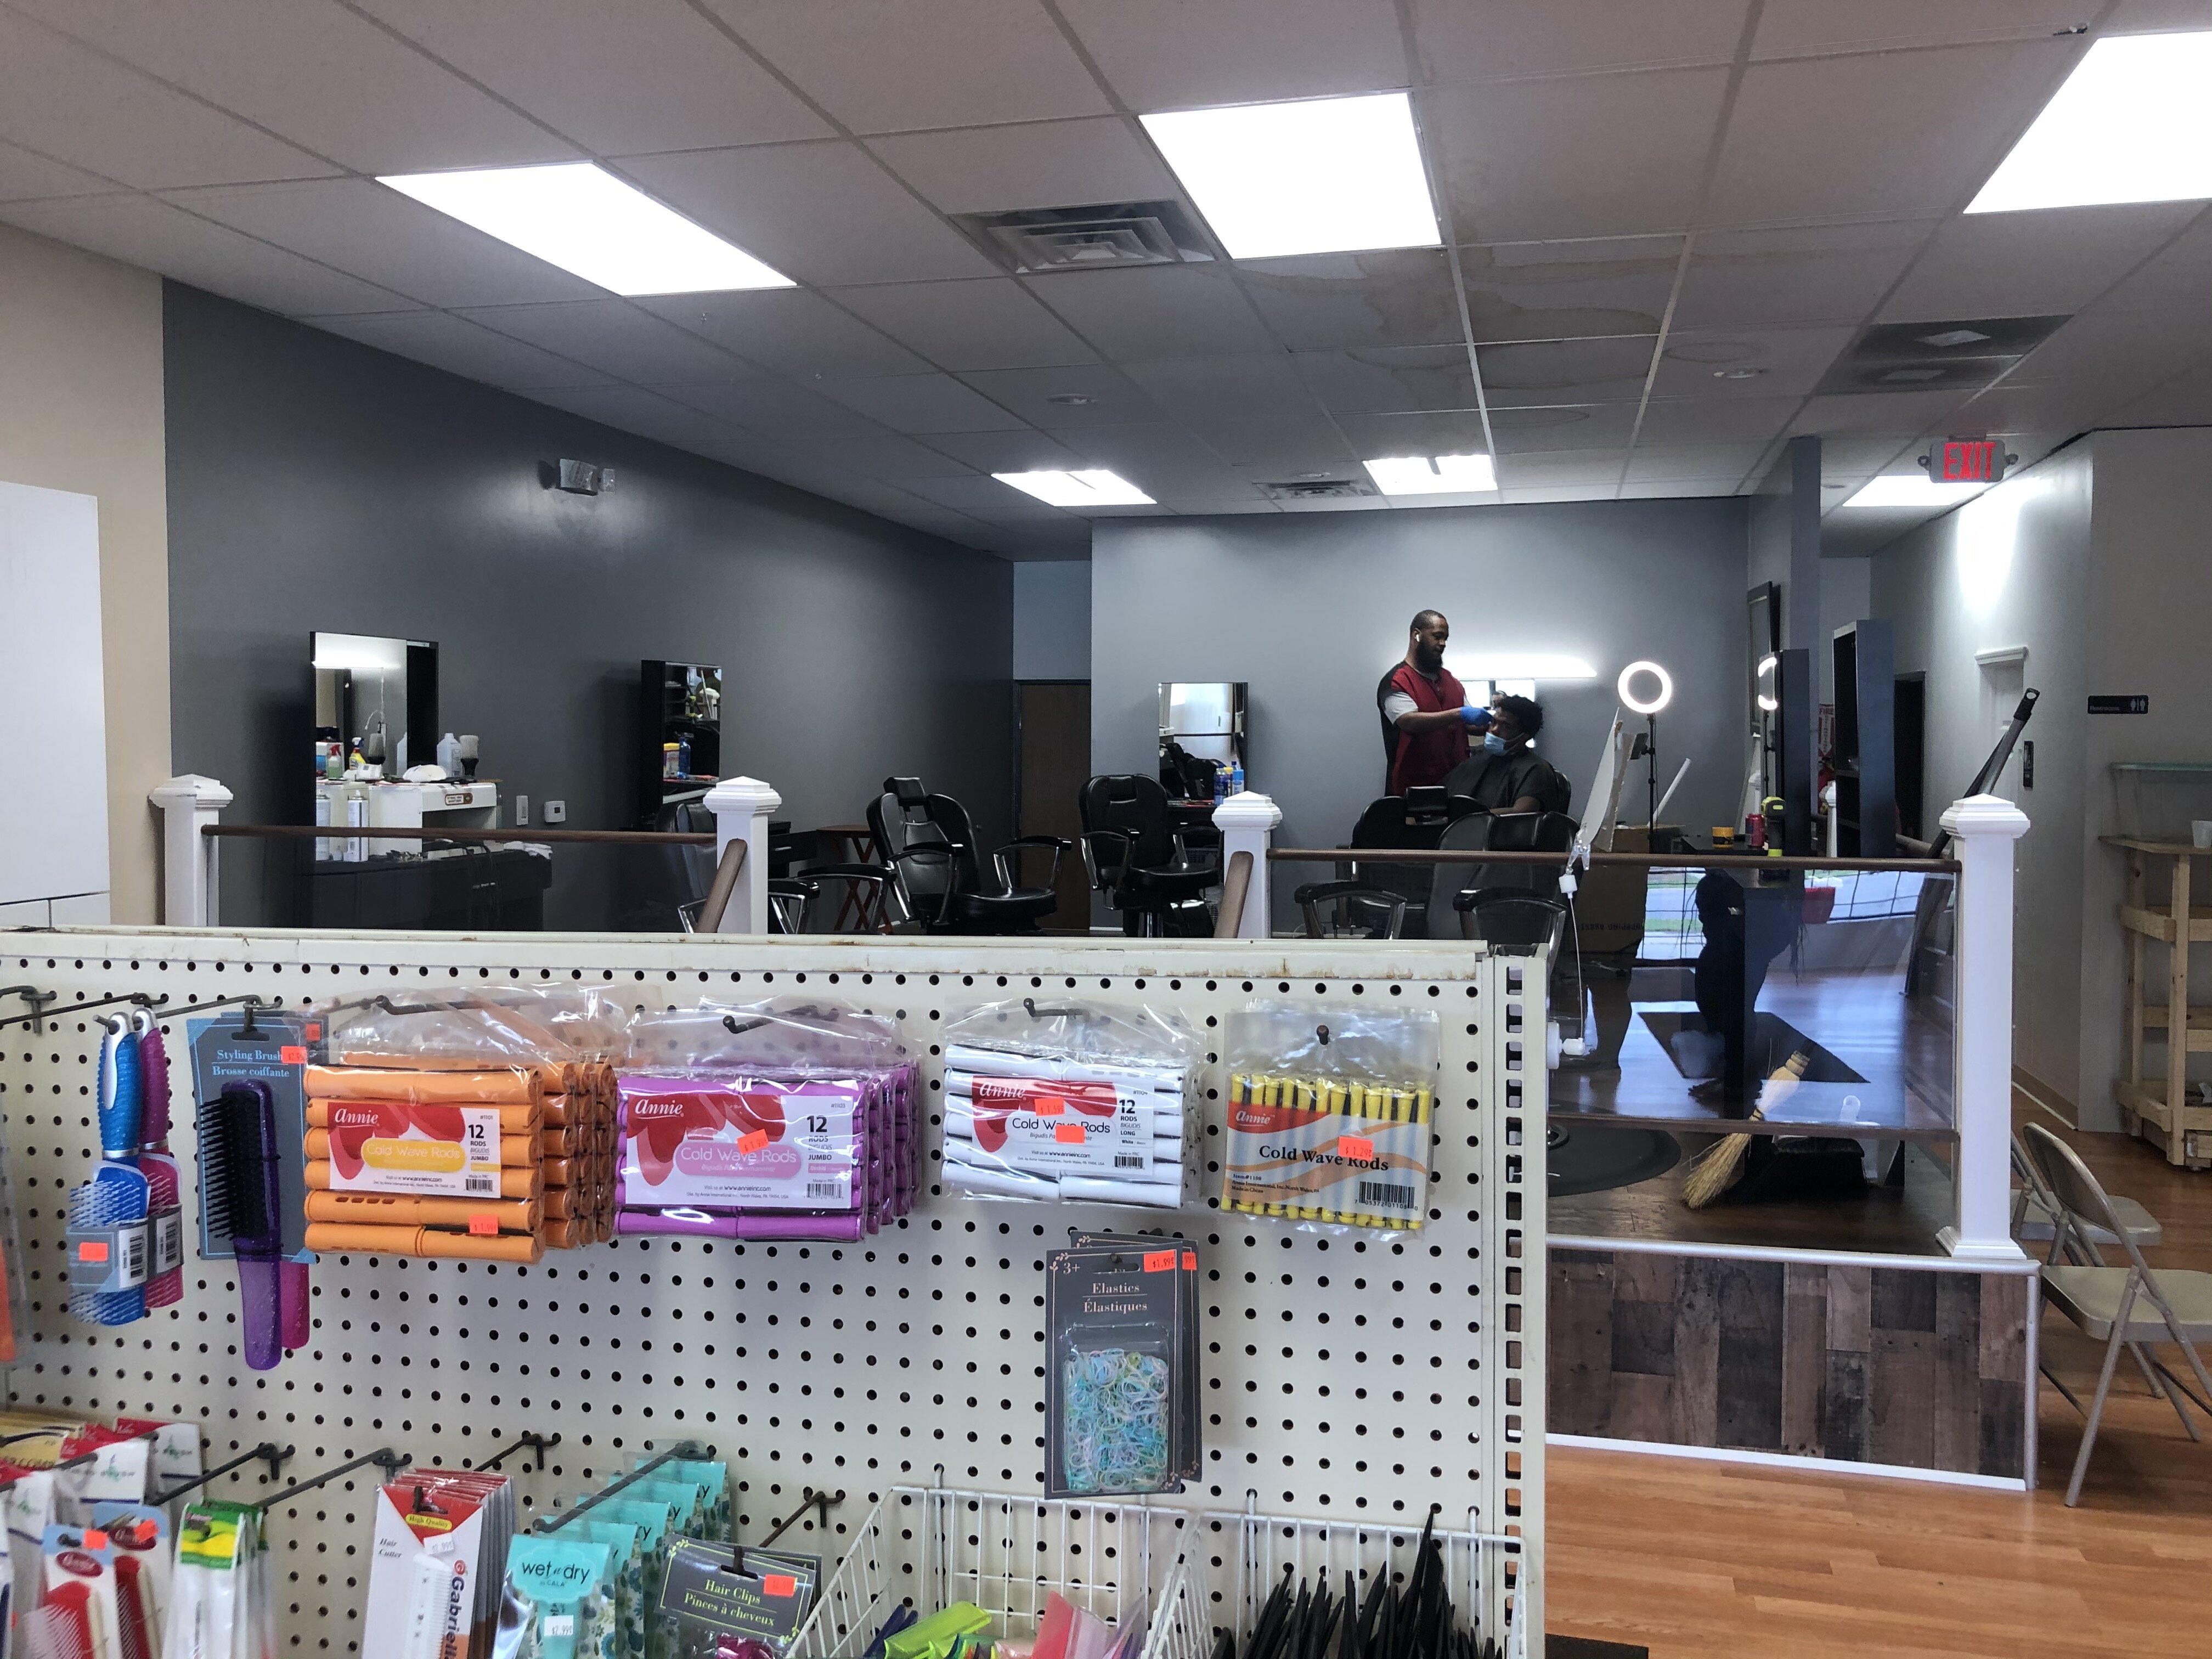 A look inside of Caught My Eye Barber and Beauty Supply.